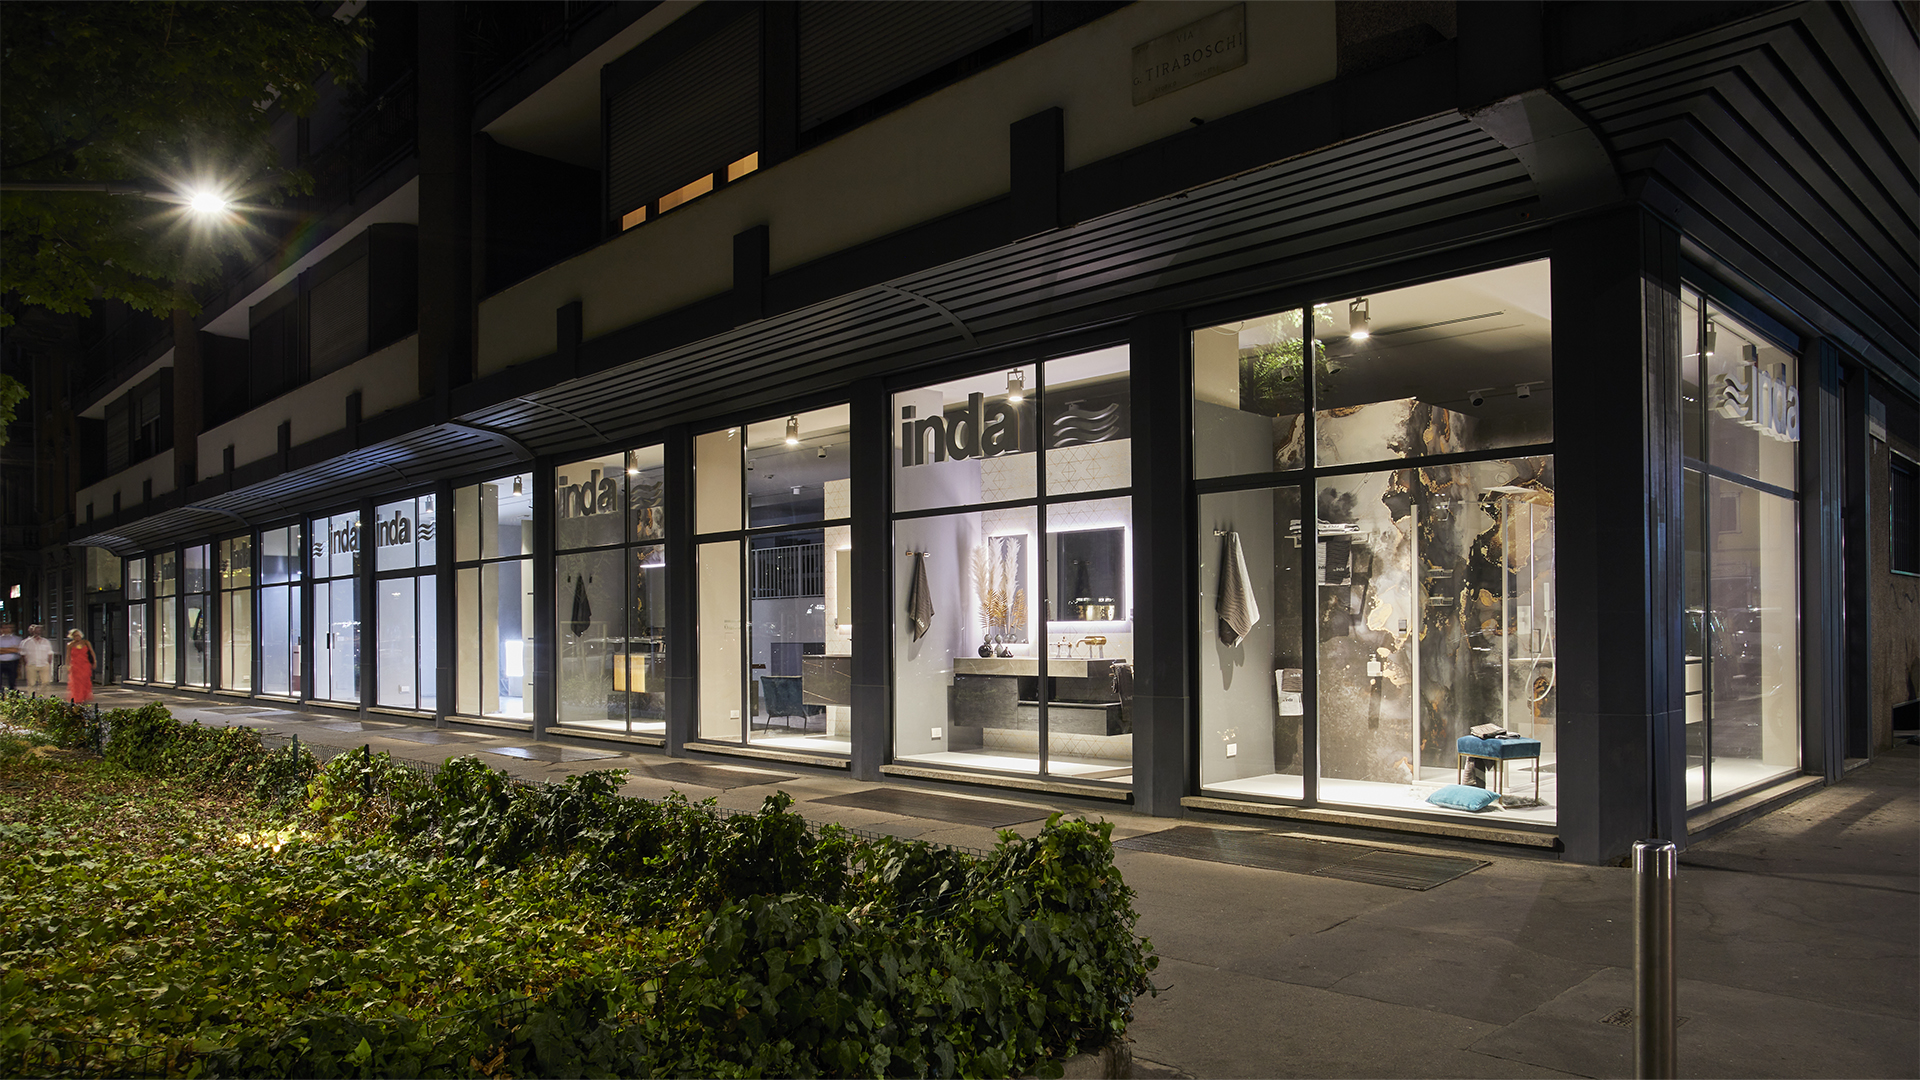 INDA MILANO, THE FIRST SPACE DEDICATED TO THE INDA WORLD 